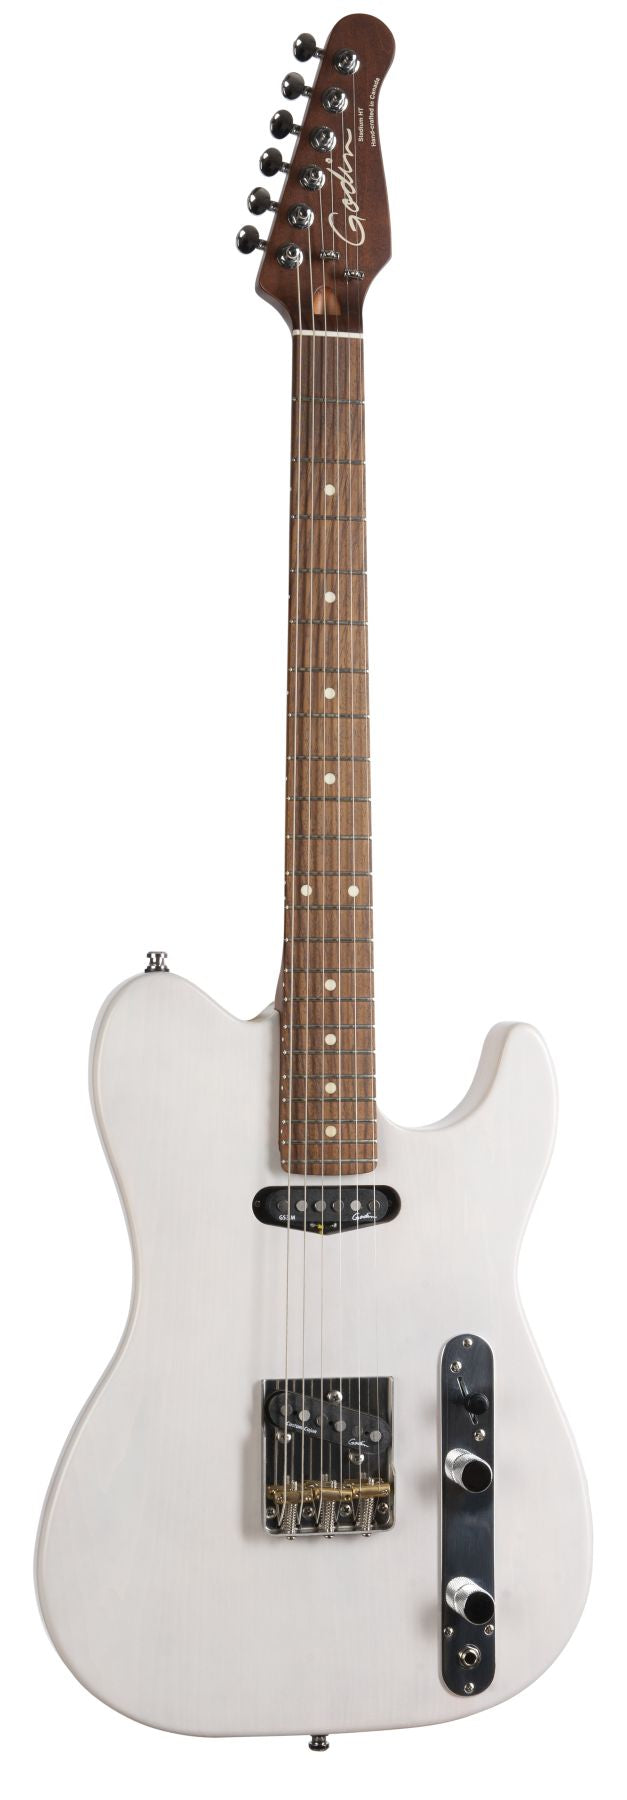 Godin 049349 Stadium HT Trans White RN Electric Guitar Made In Canada With Bag - Slight Finish Flaw